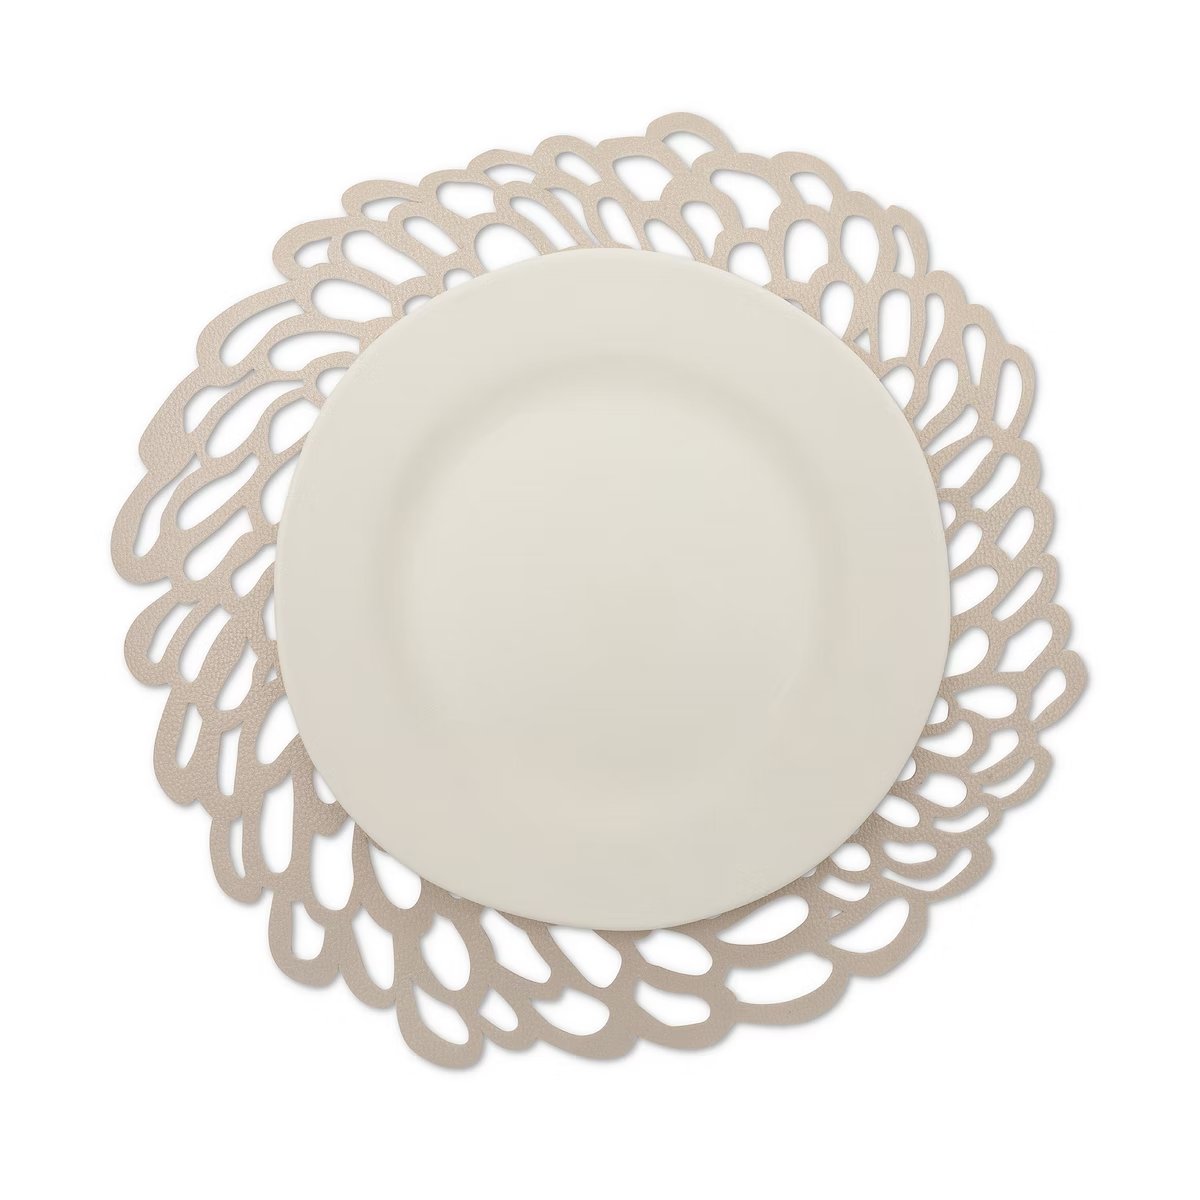 A lace effect washable paper circular placemat is shown in beige, under a white plate.